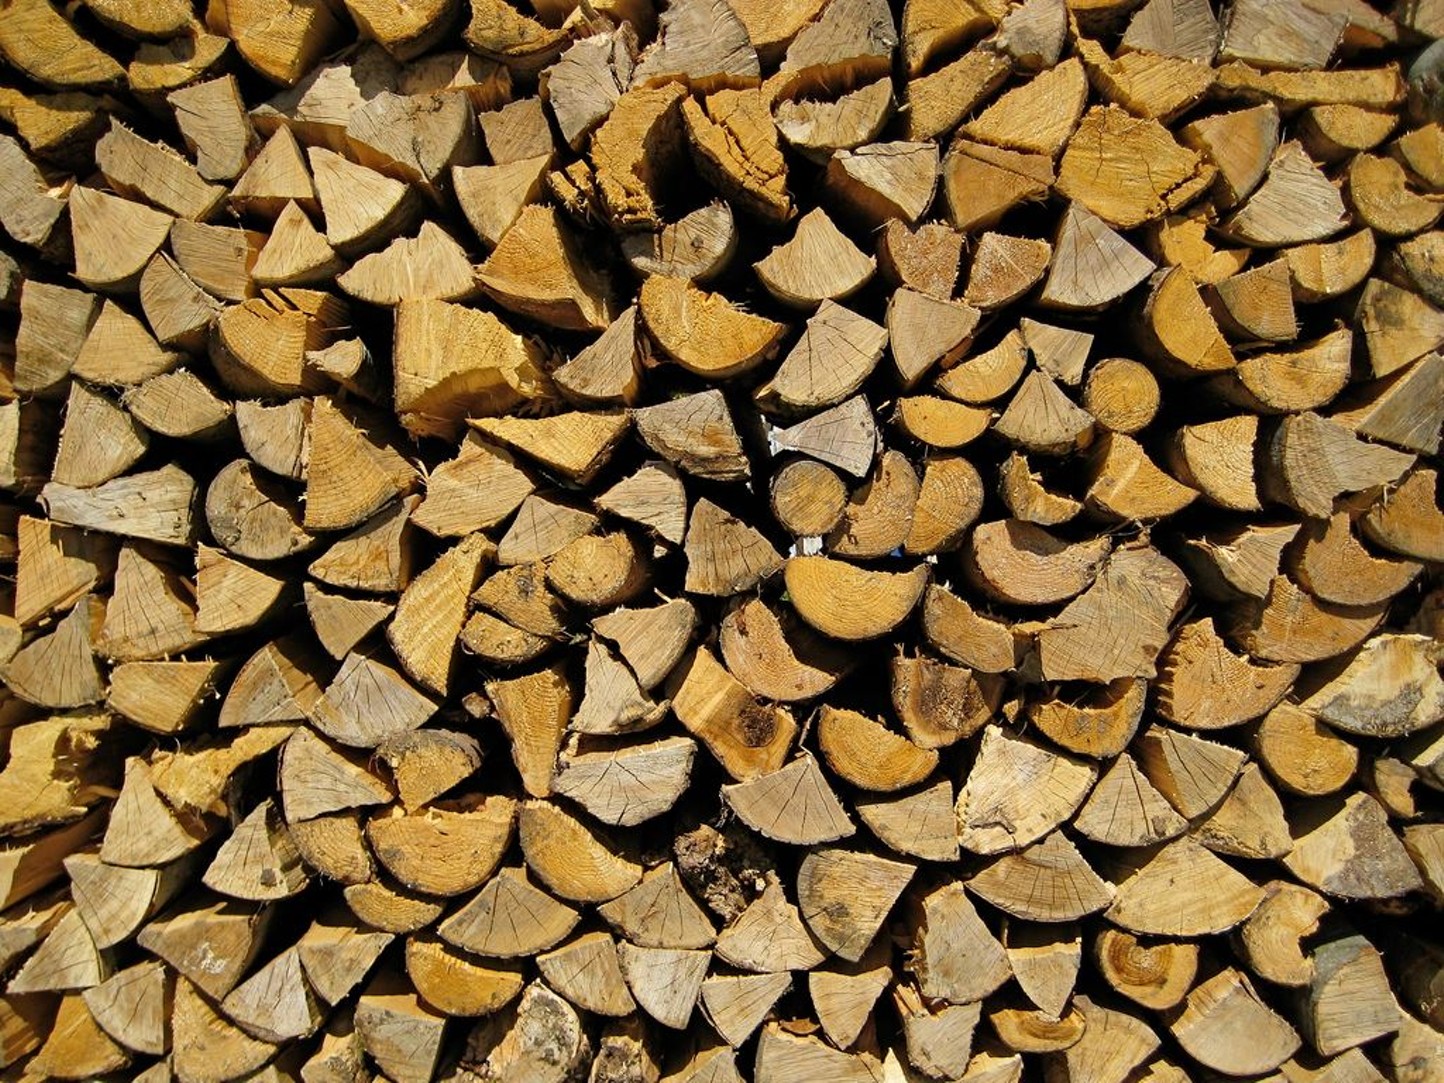 Prepping Firewood for Autumn